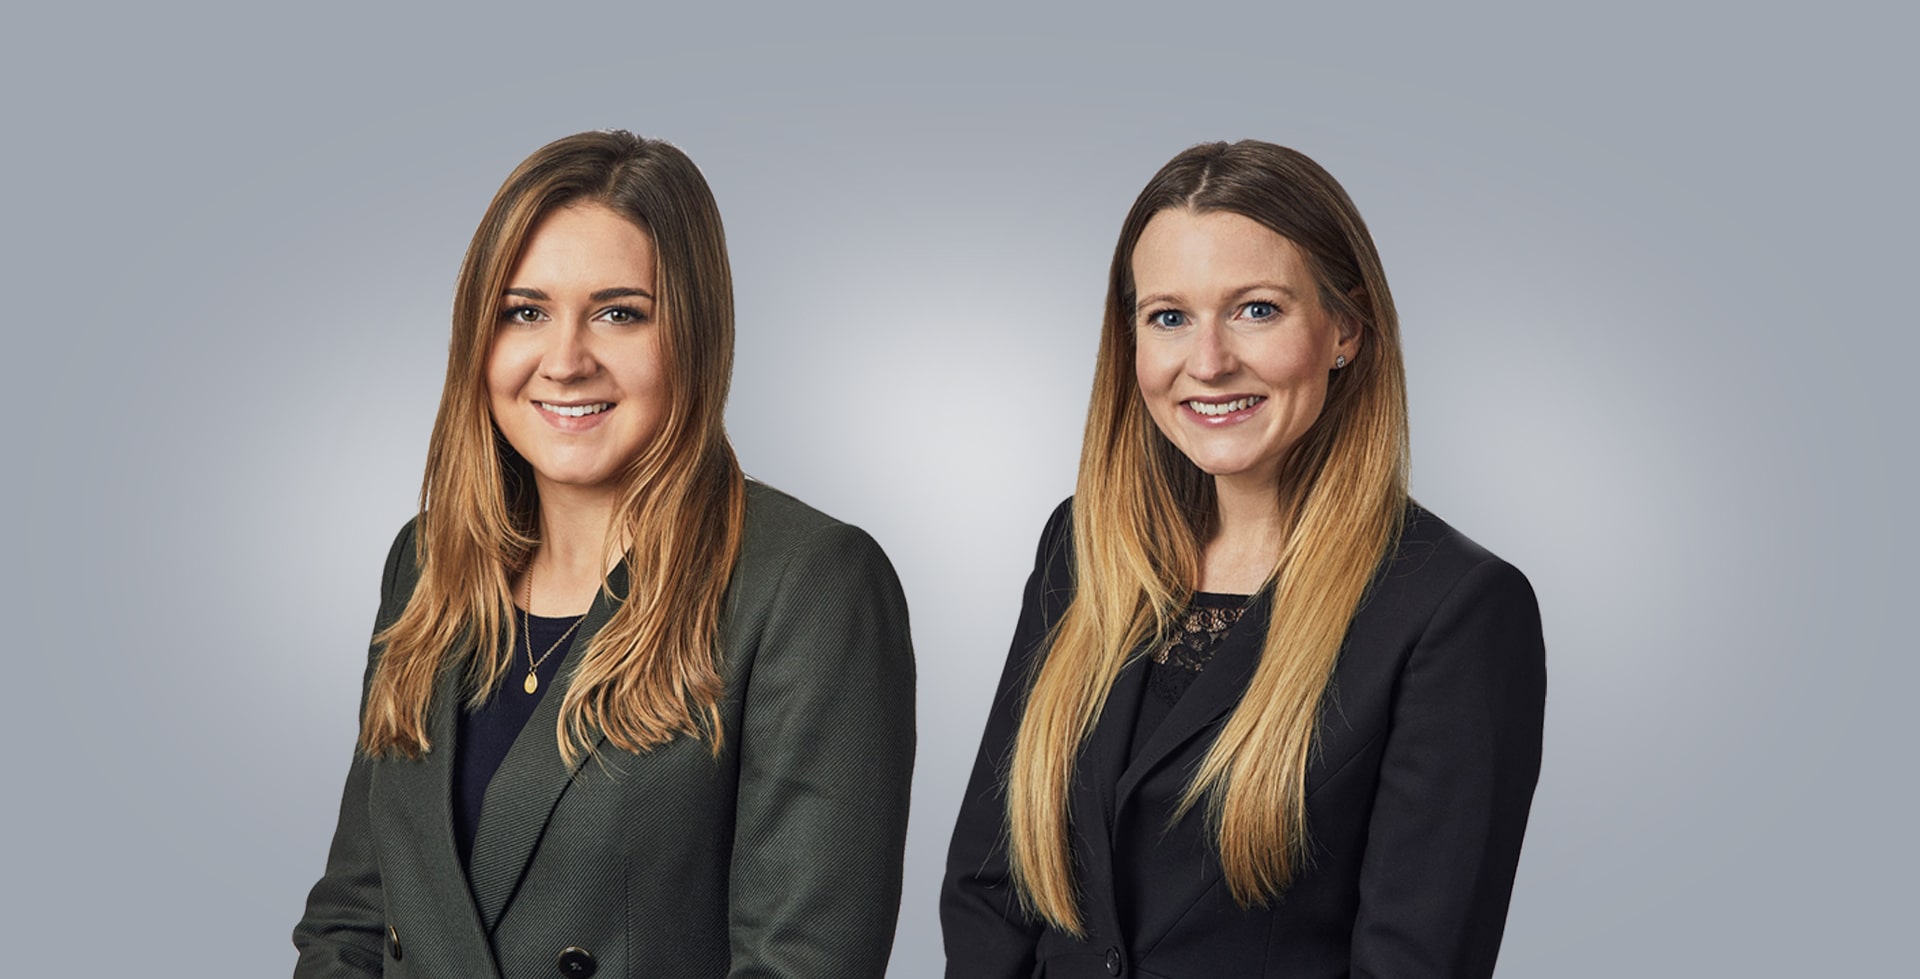 Horizon Capital expands investment team with two new hires